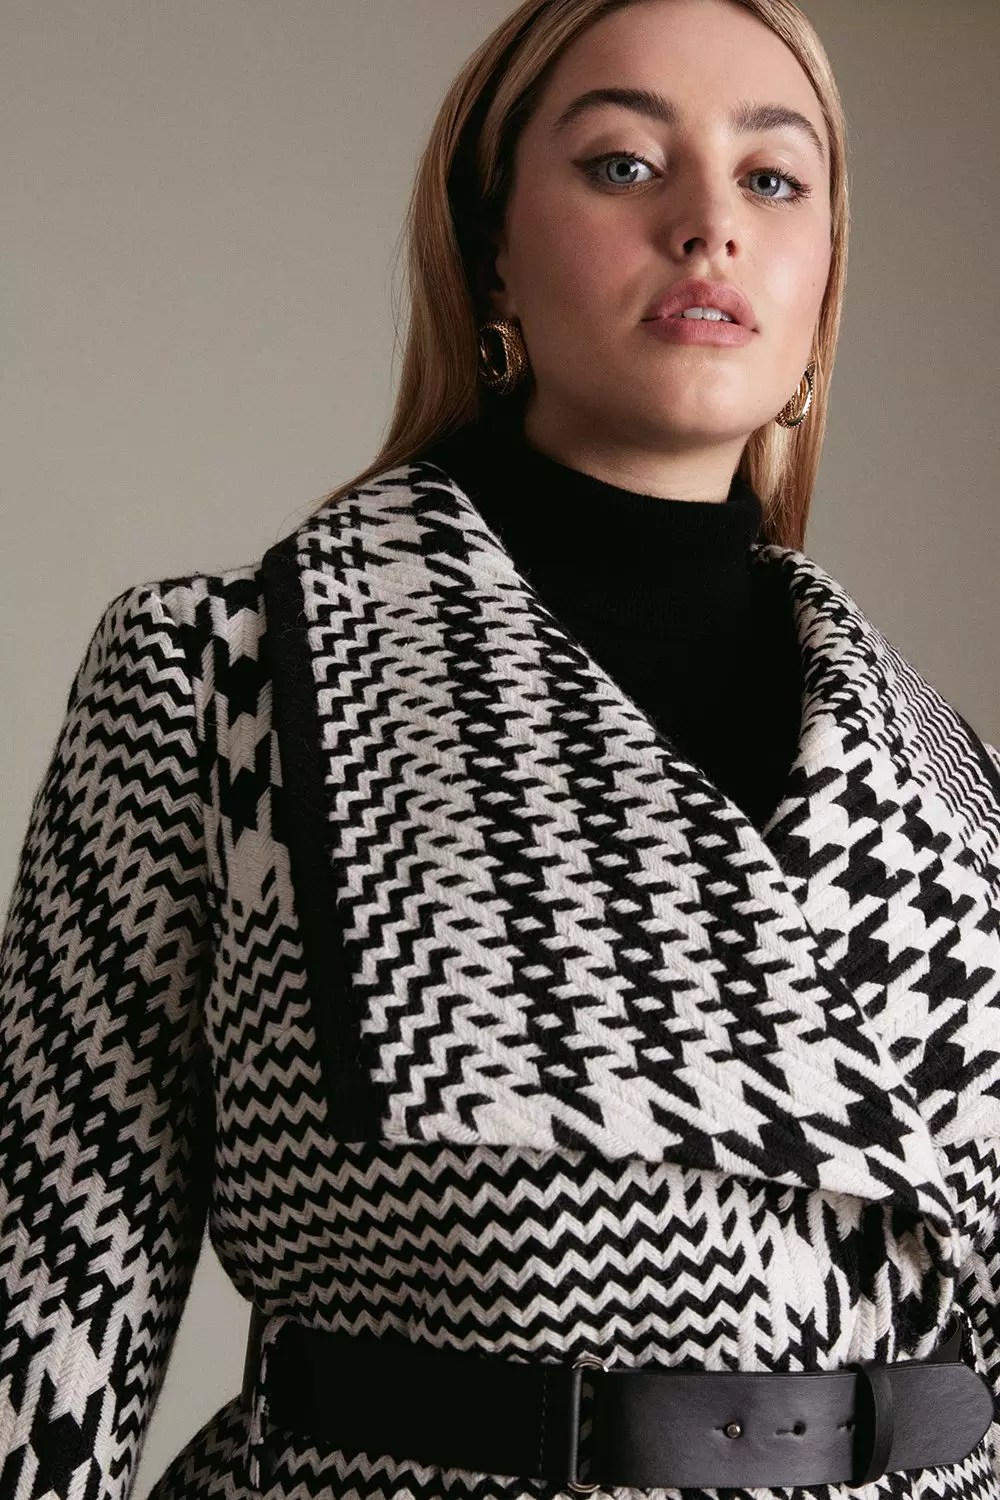 Houndstooth Check Wool Blend Coat